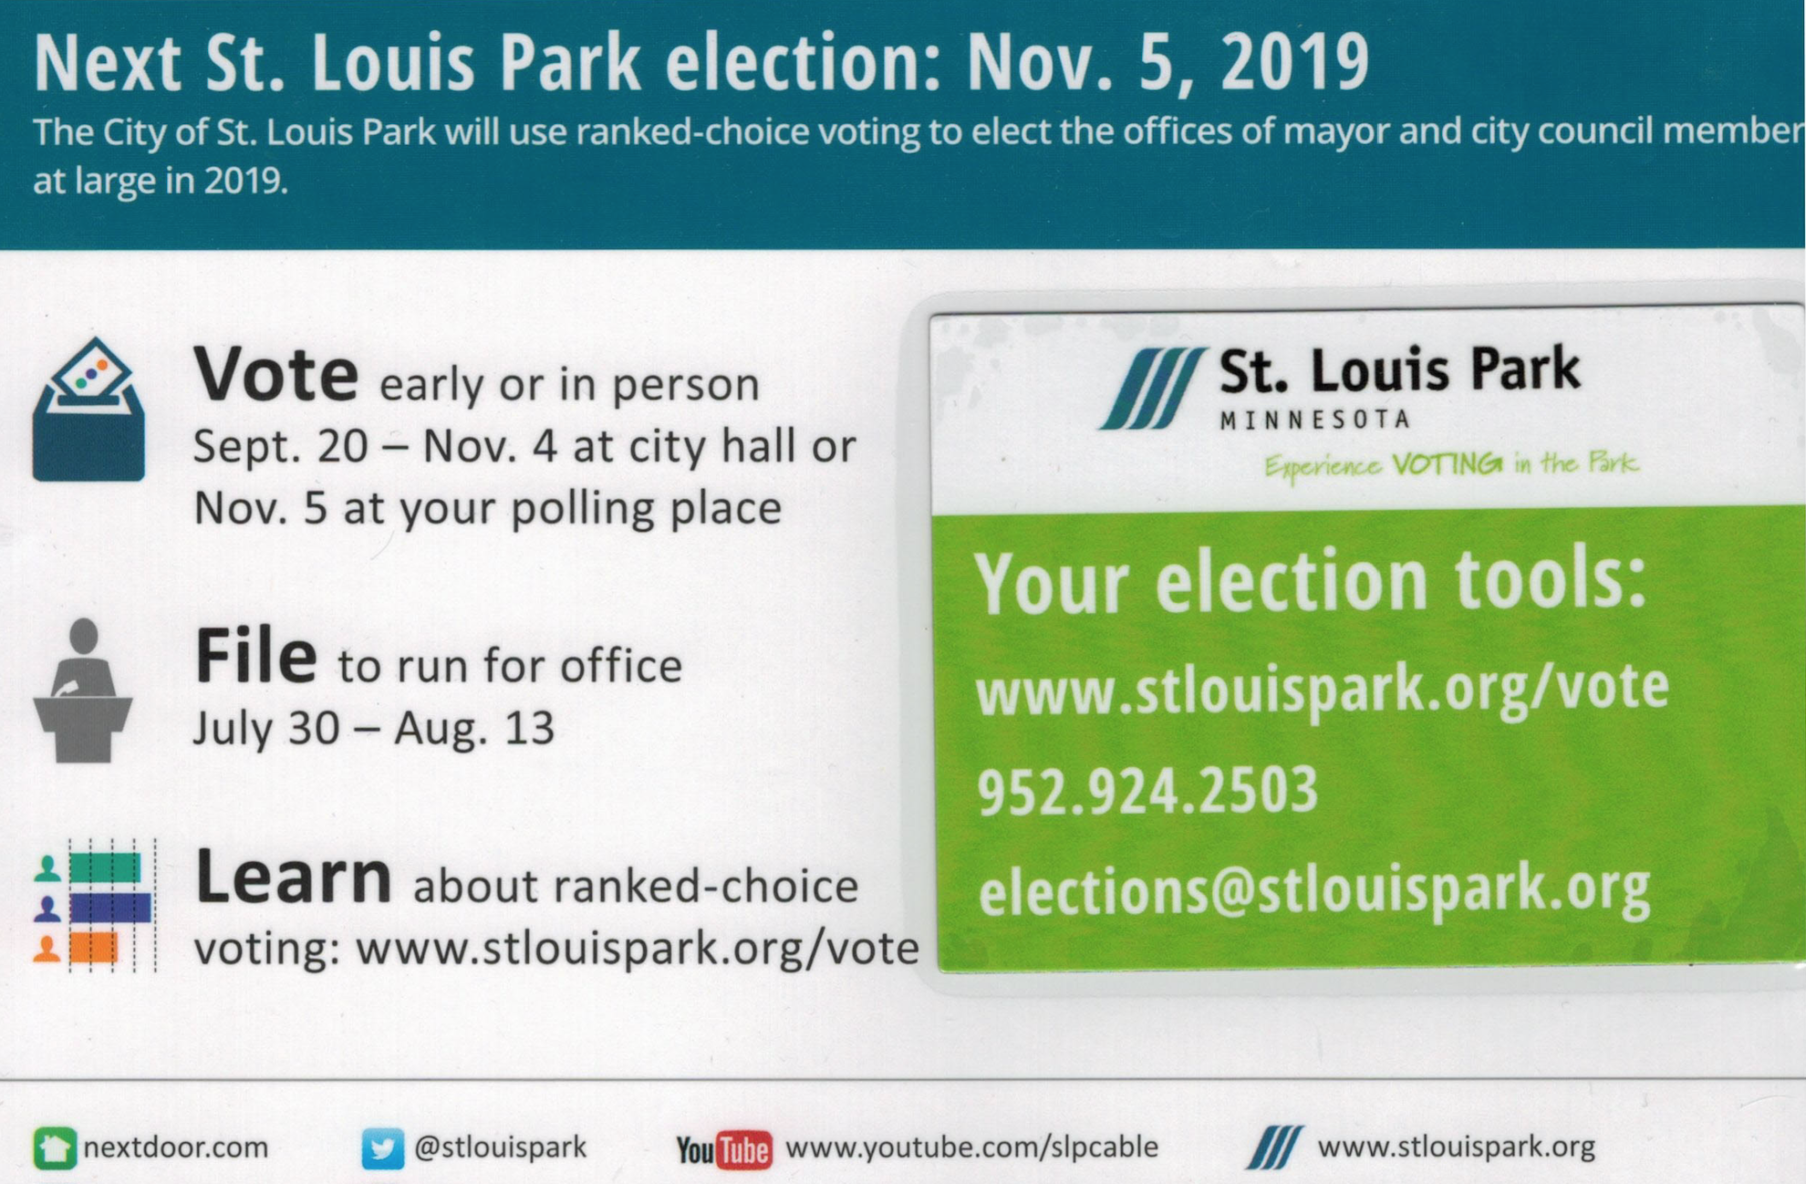 Vote early or in person. File to run for office. Learn about ranked-choice voting. Card also has a magnet card with contact info